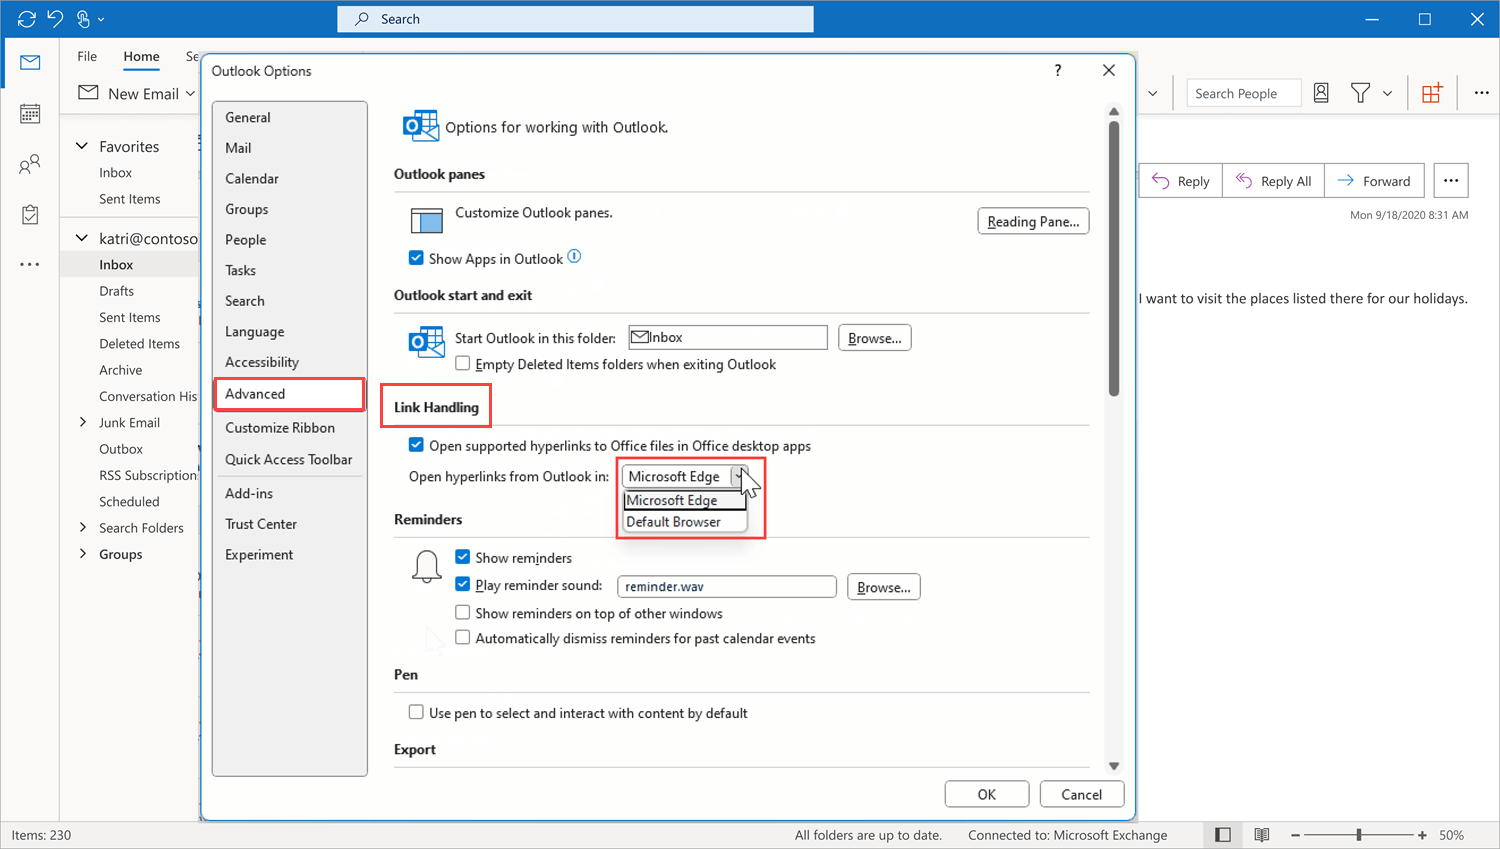 Manage link handling under Advanced in Outlook Settings.